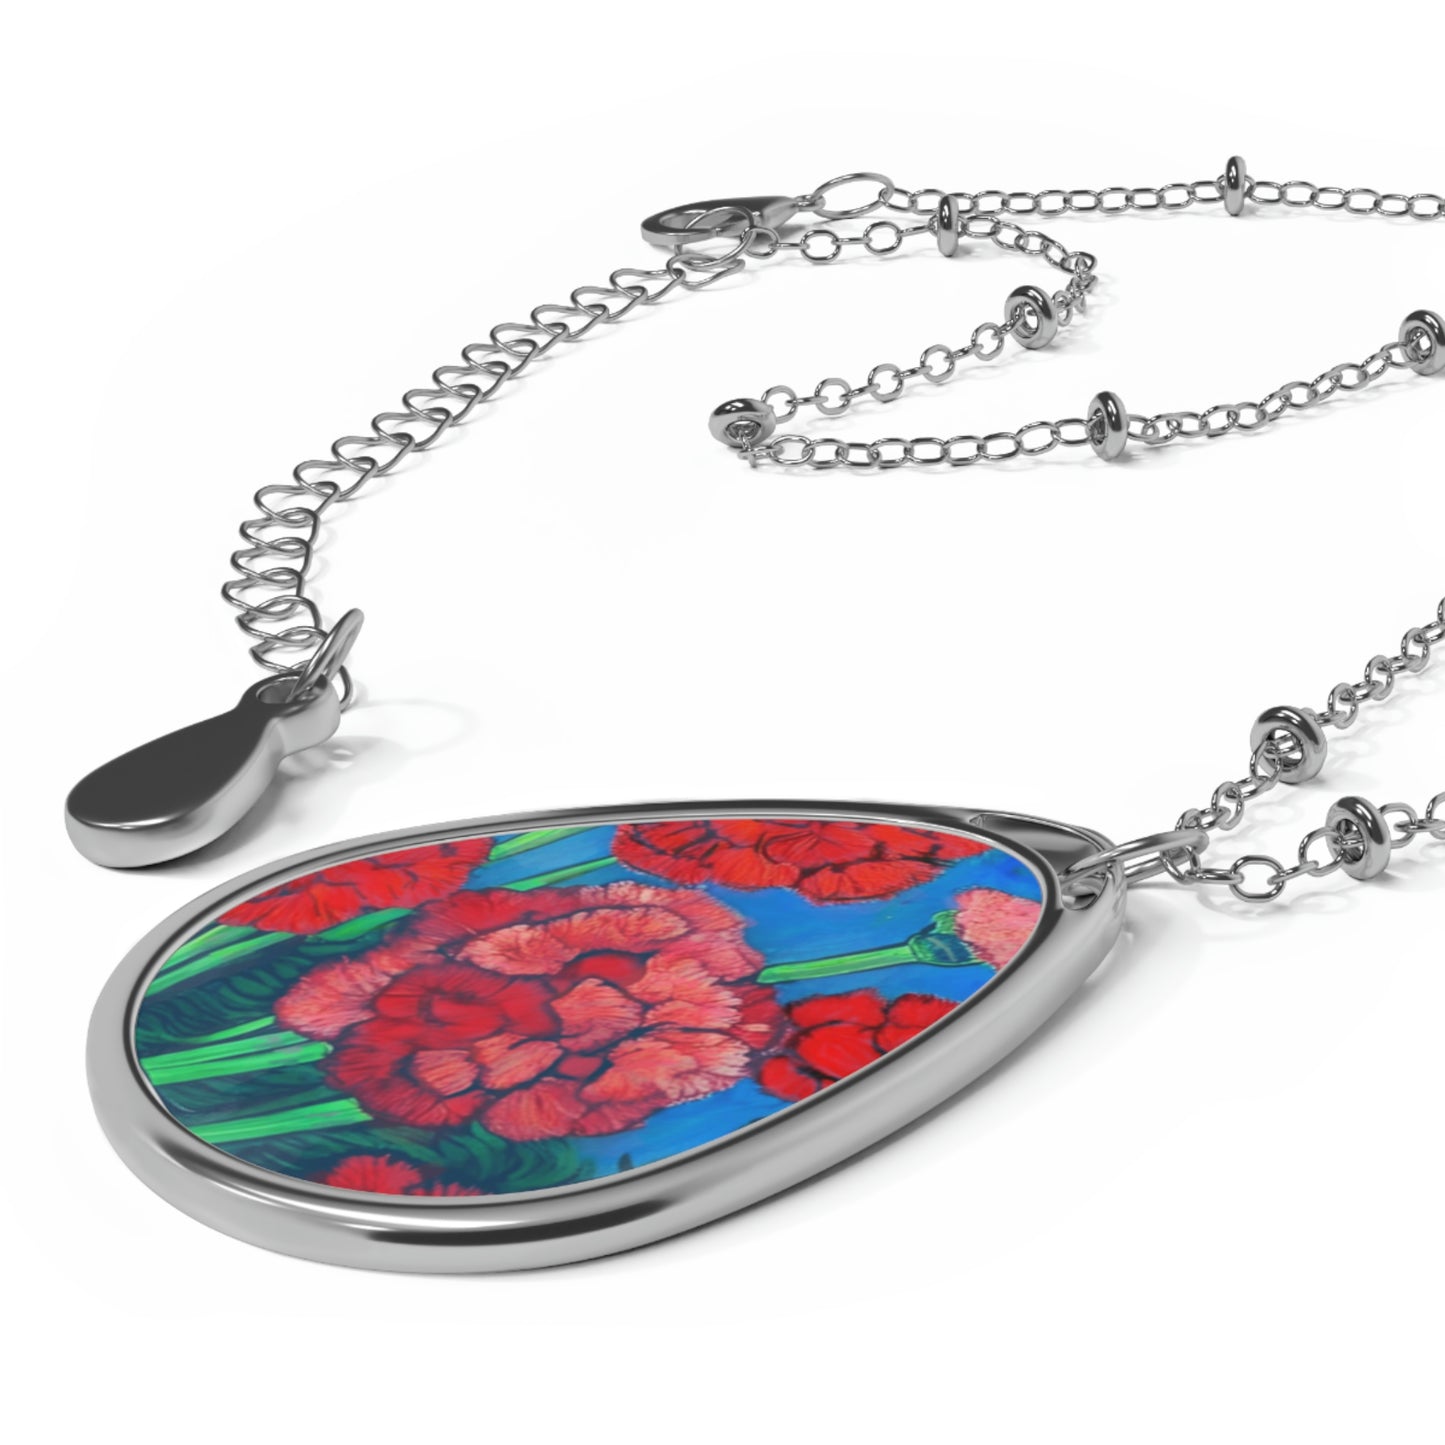 Art of Mari Accessories, Carnation necklace